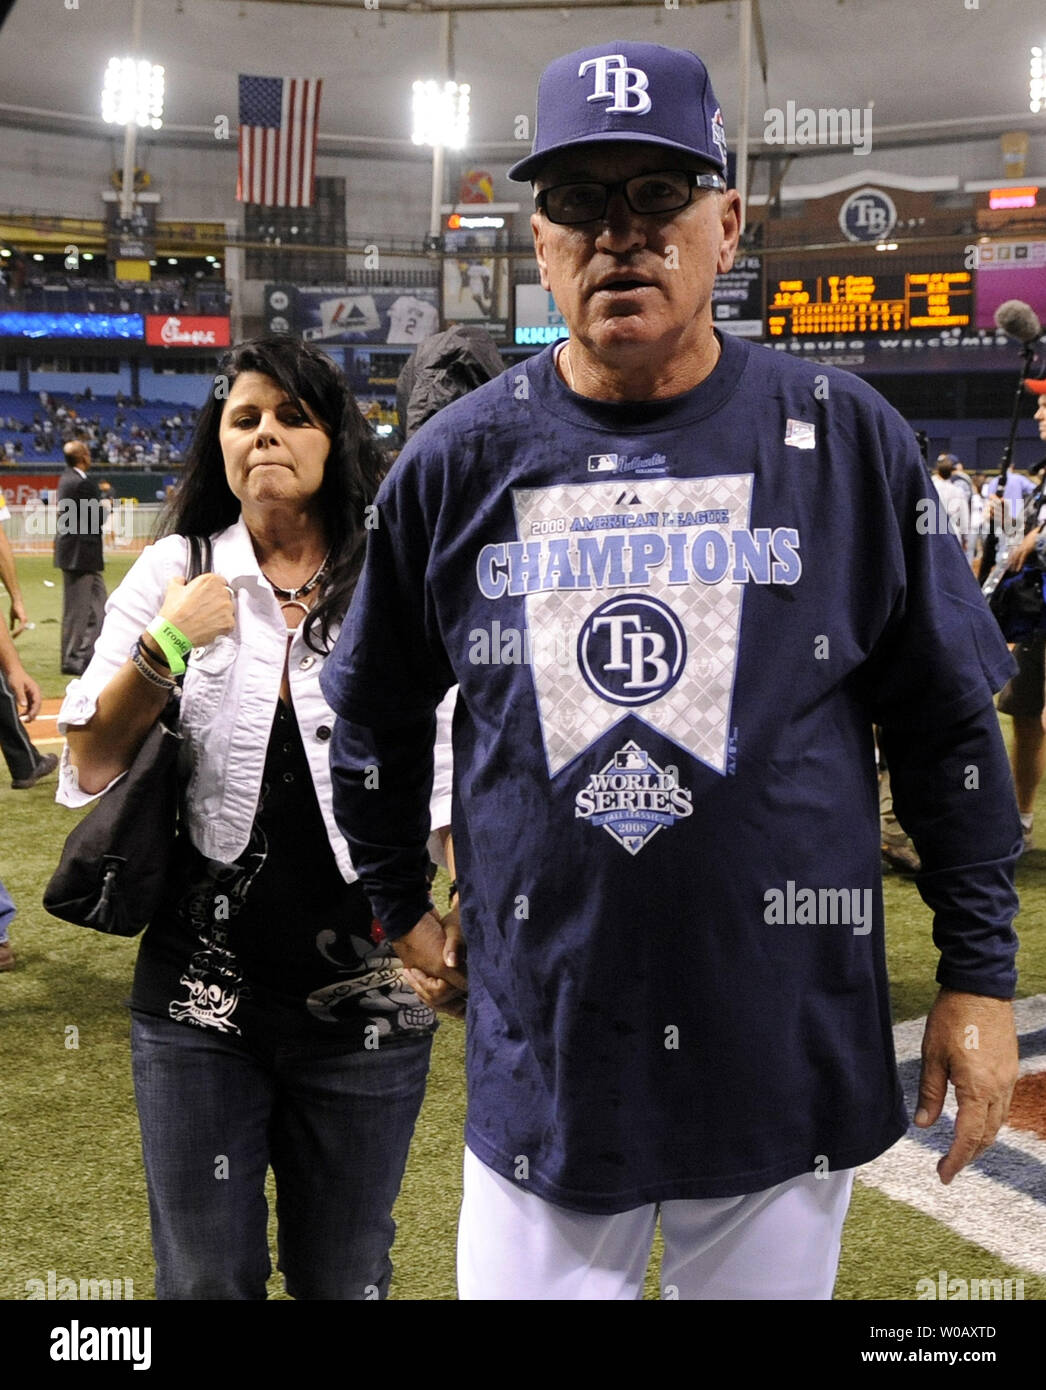 Tampa Bay Rays Manager Joe Maddon leaves the field after the Rays defeated  the Boston Red Sox 3-1 to win the American League Championship at Tropicana  Field in St. Petersburg, Florida on